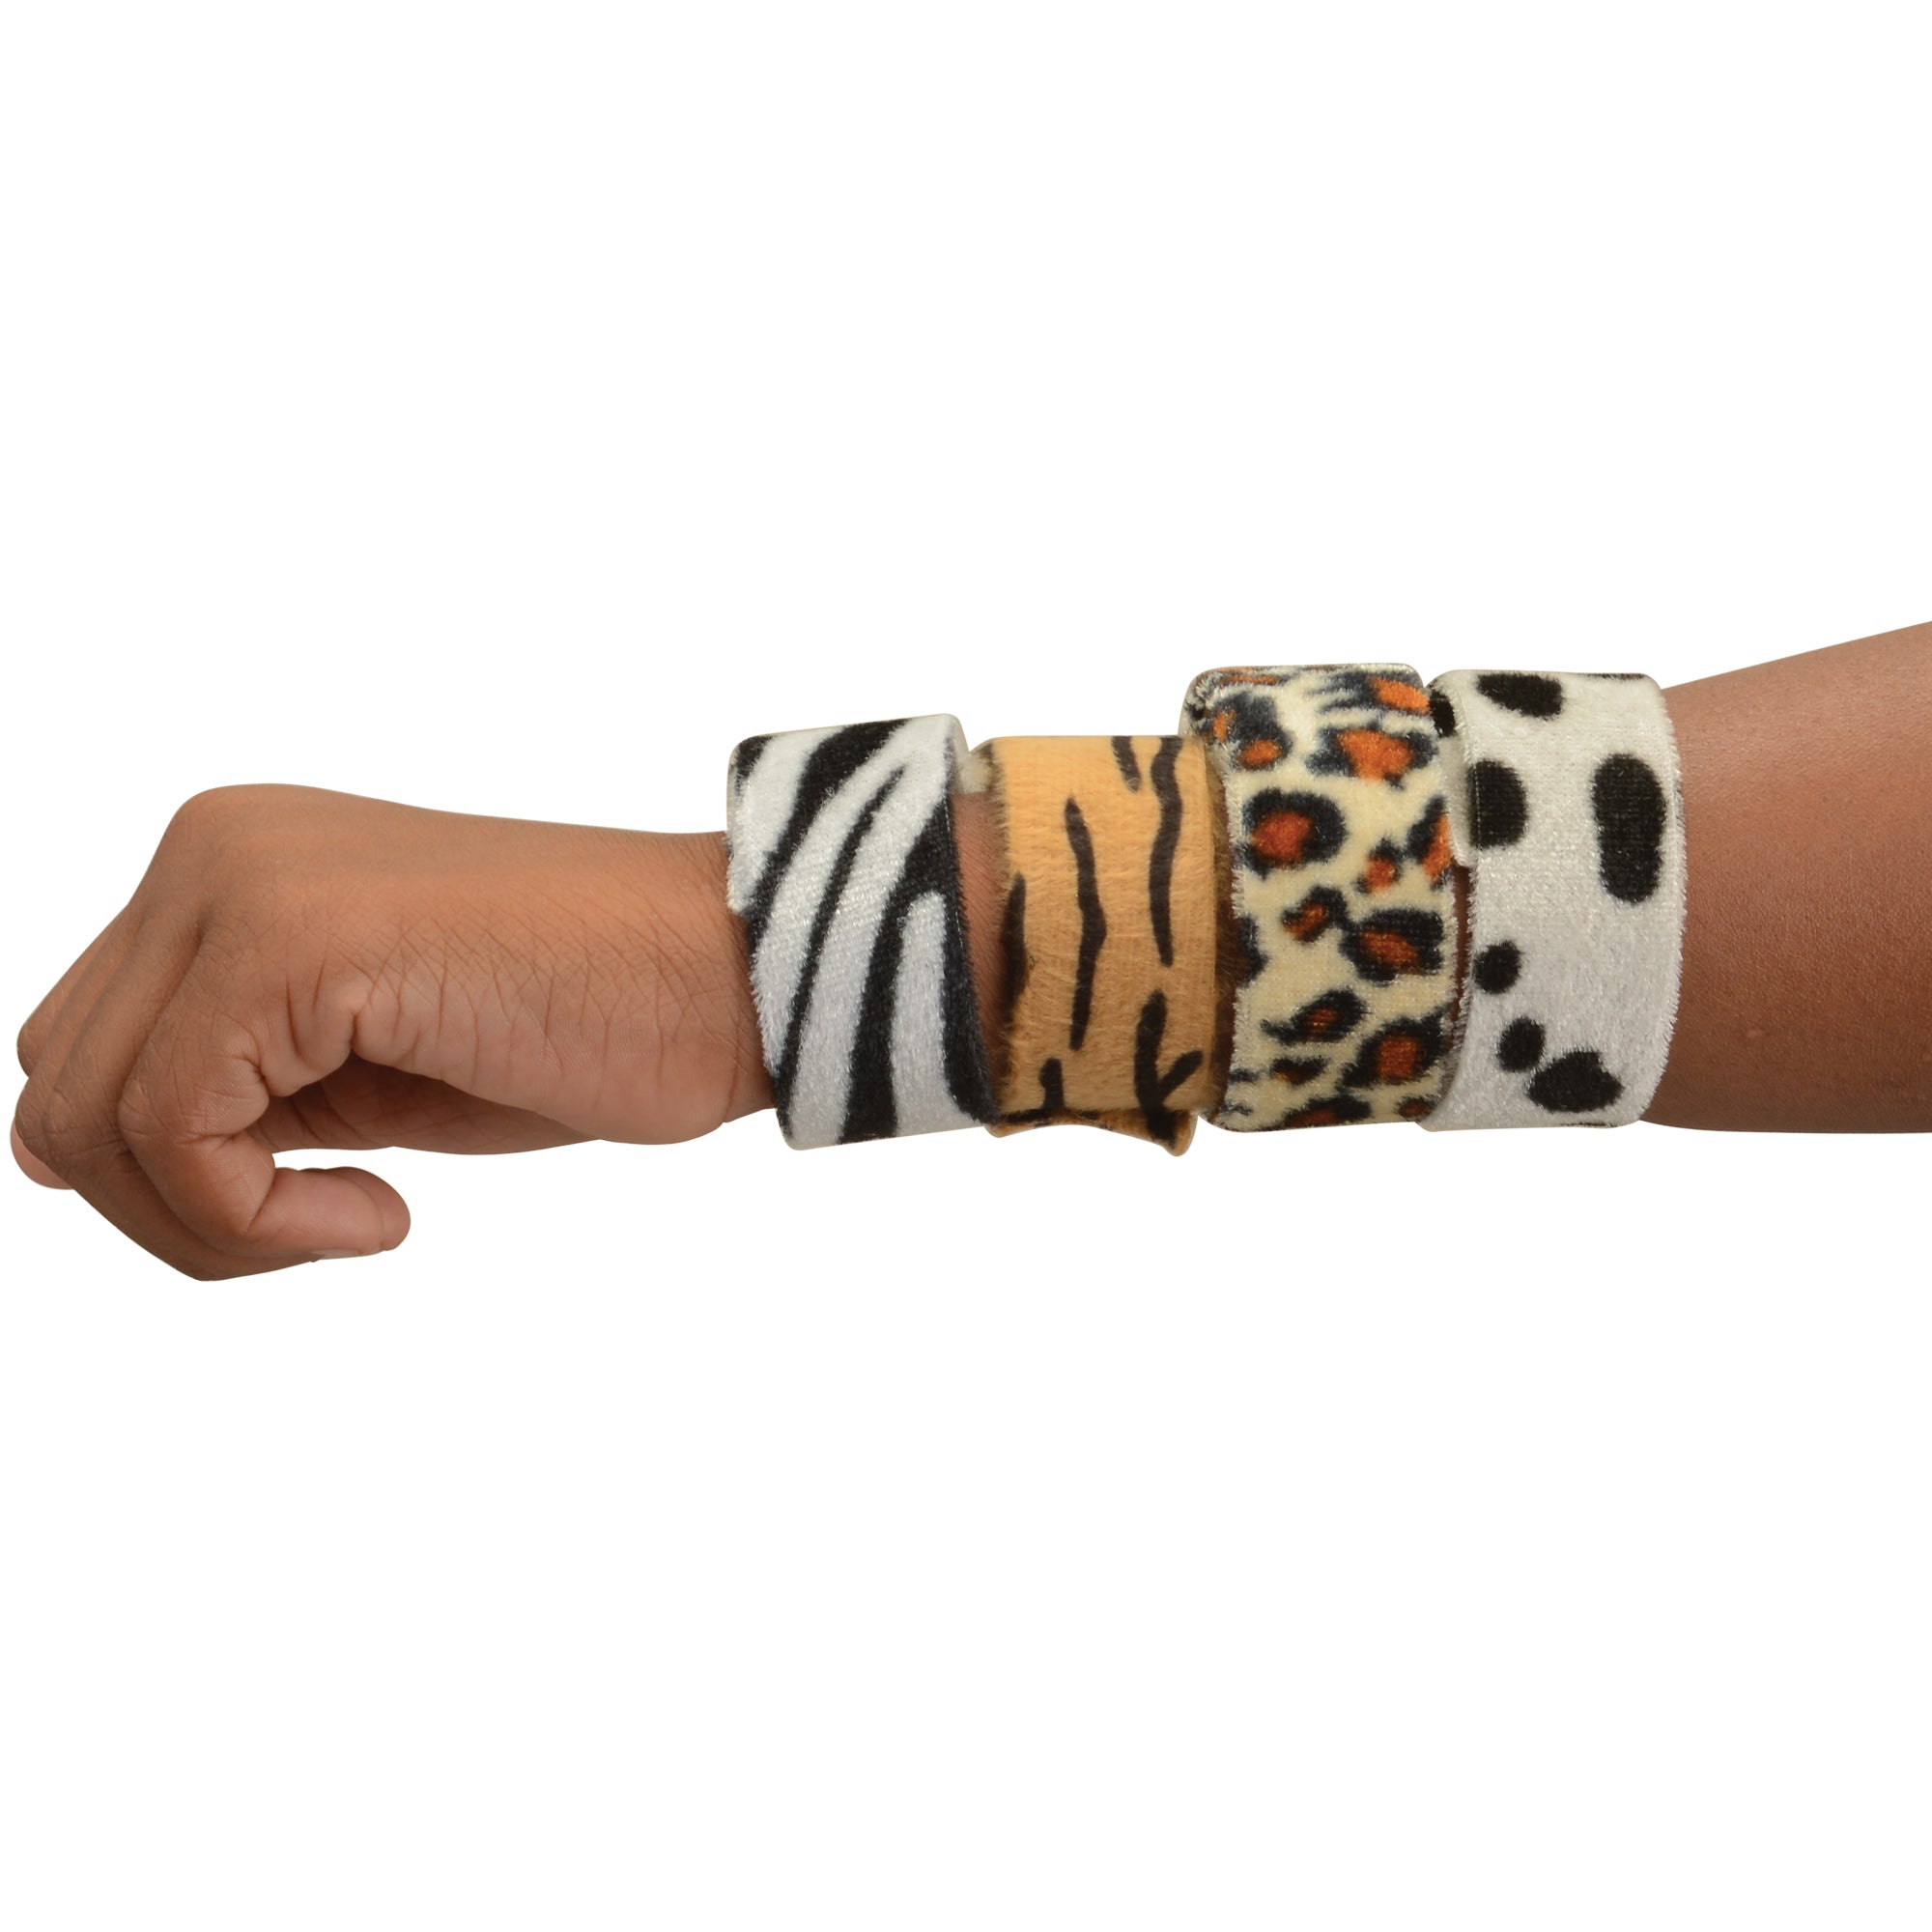 Funpa Animal Heart Print Wristbands Party Favor Slap Bands With Fun Design  Patterns From H9en, $43.57 | DHgate.Com